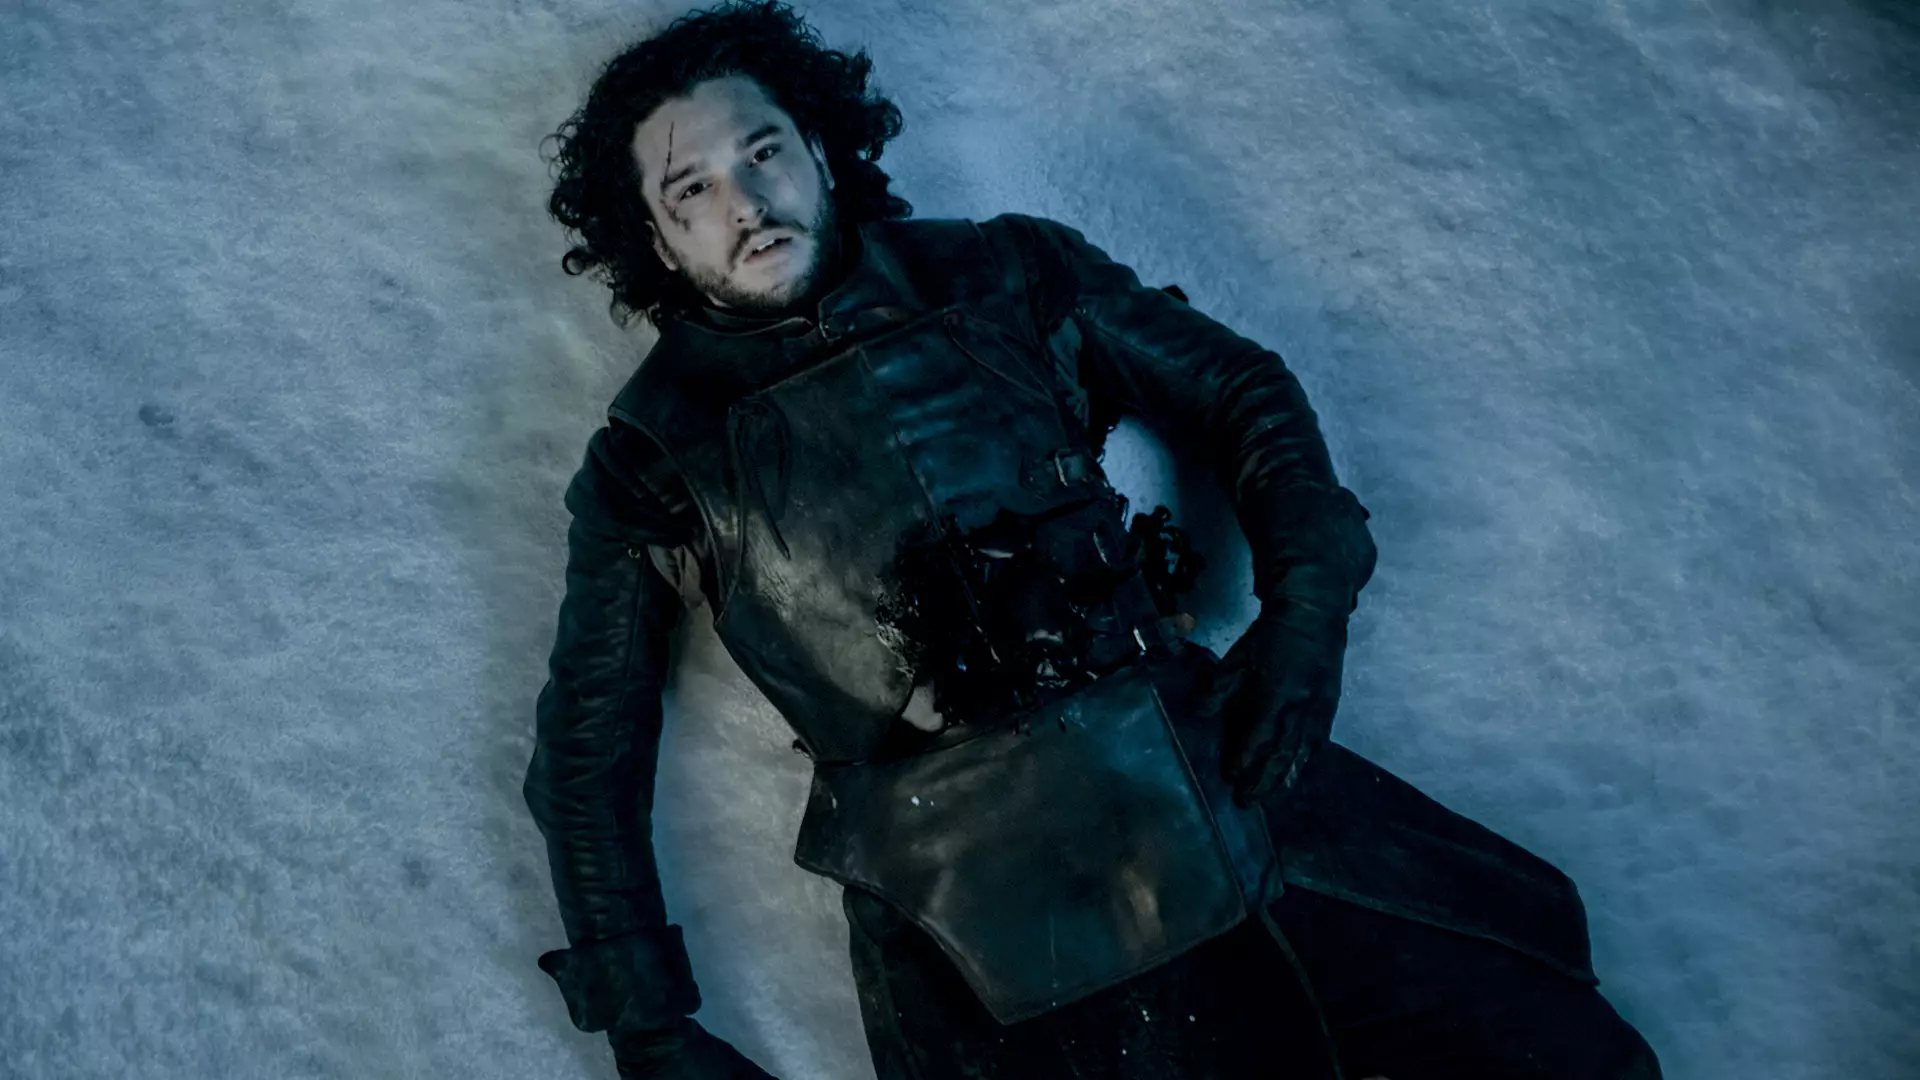 New Scene From 'Game Of Thrones' Gives Us Another Look At Jon Snow's 'Death'